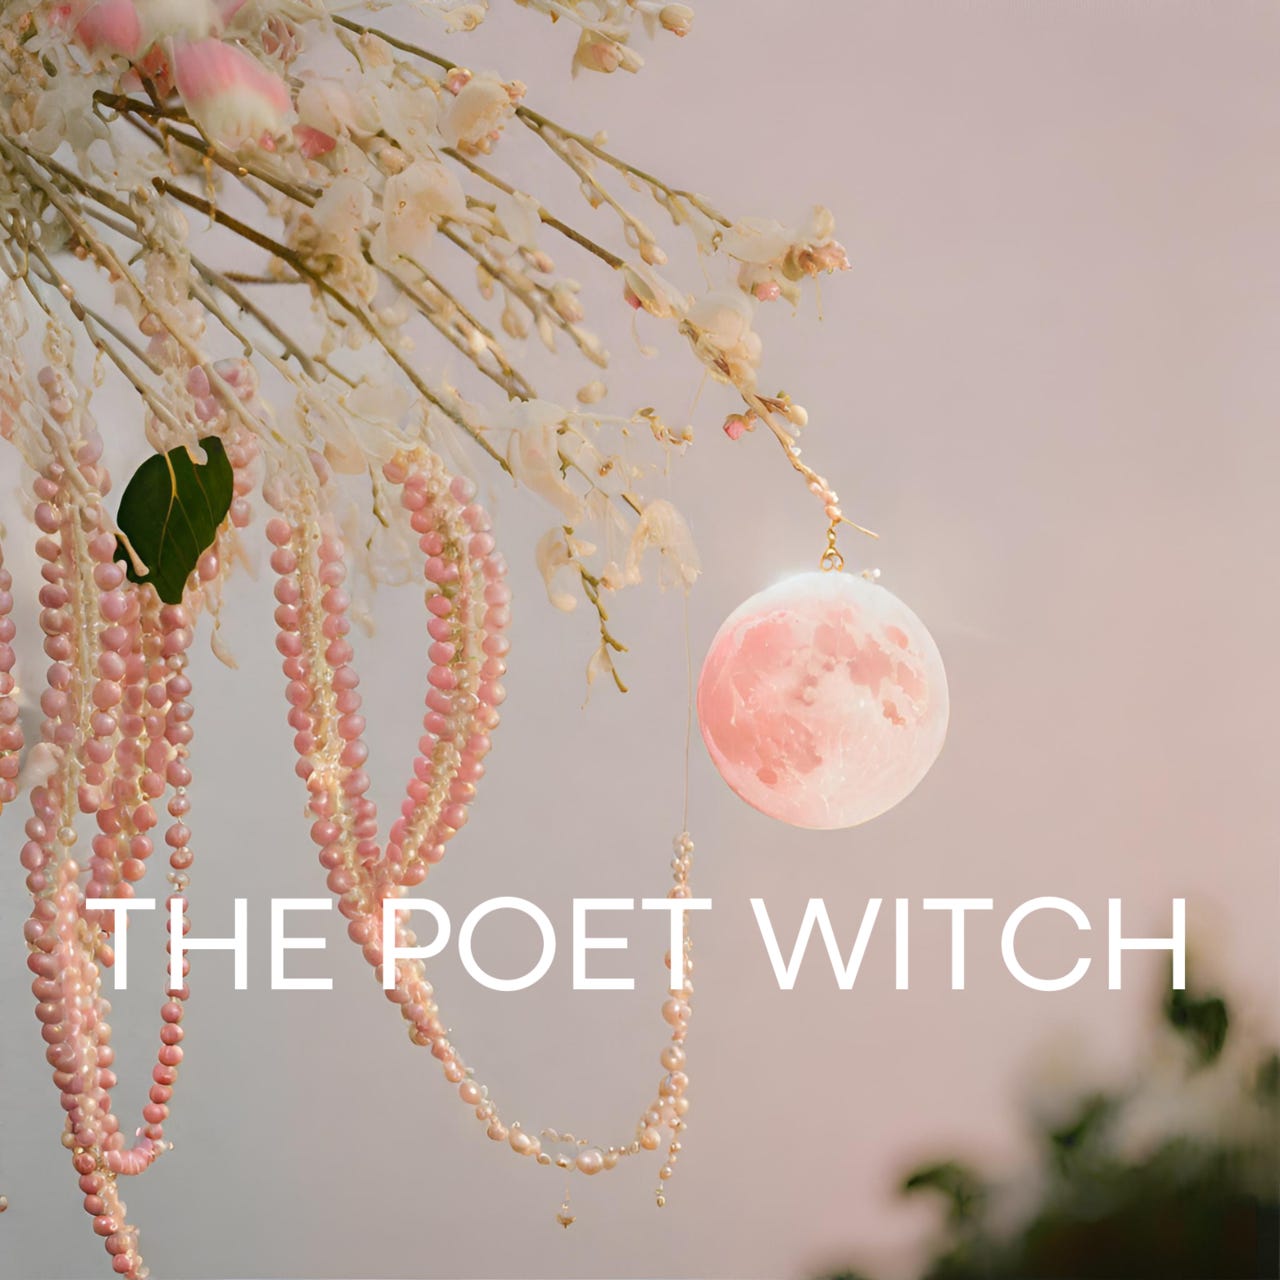 The Poet Witch